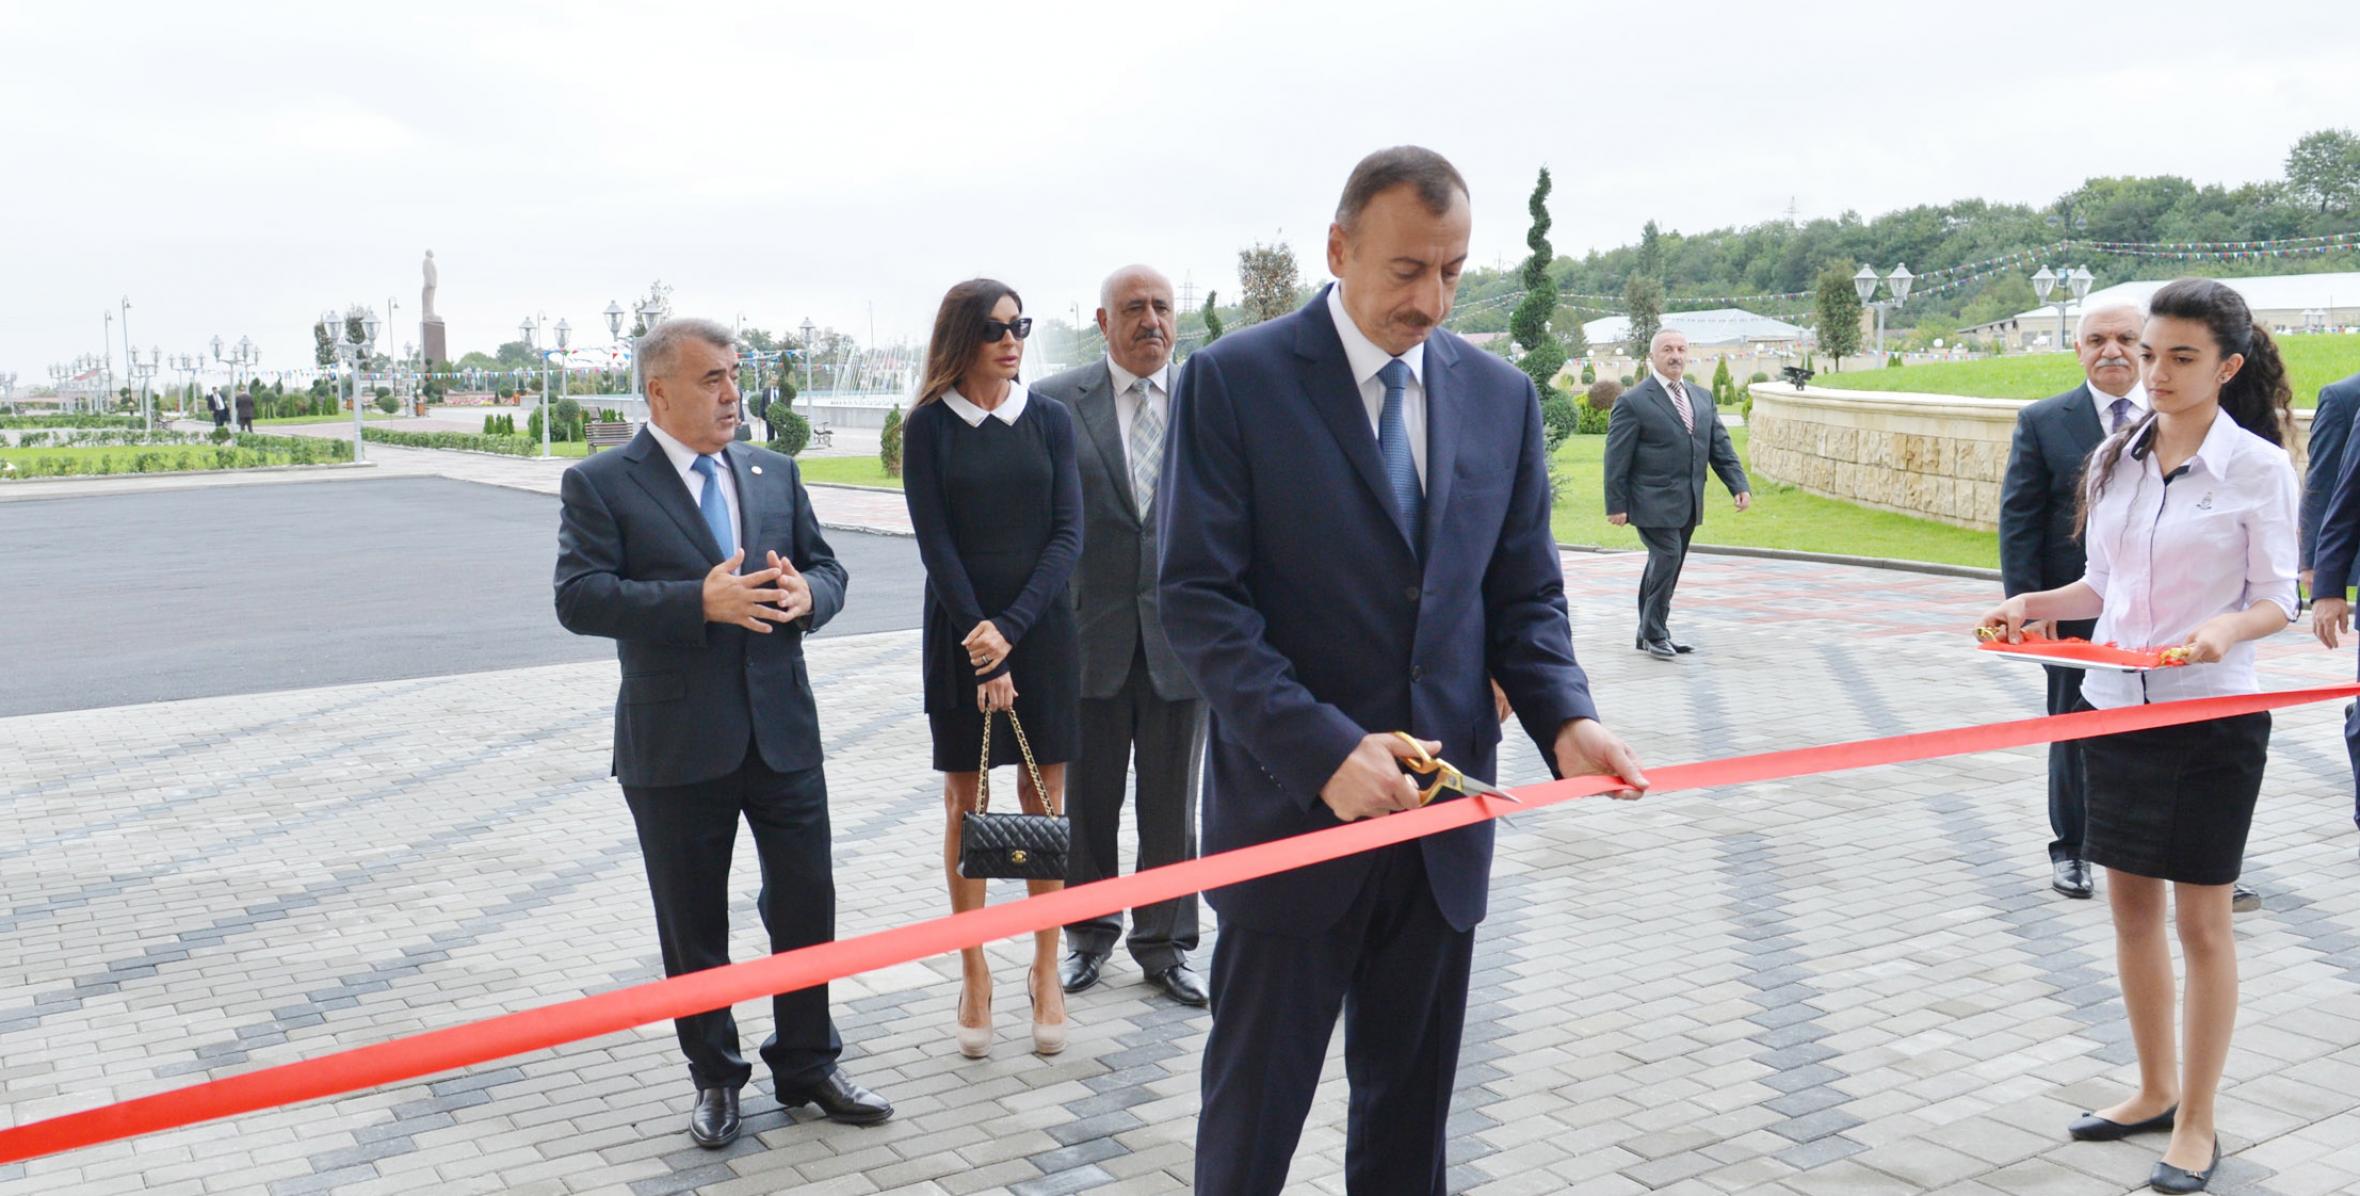 Ilham Aliyev attended the opening of the Green Theatre built in the Culture and Recreation Park named after Heydar Aliyev in Guba